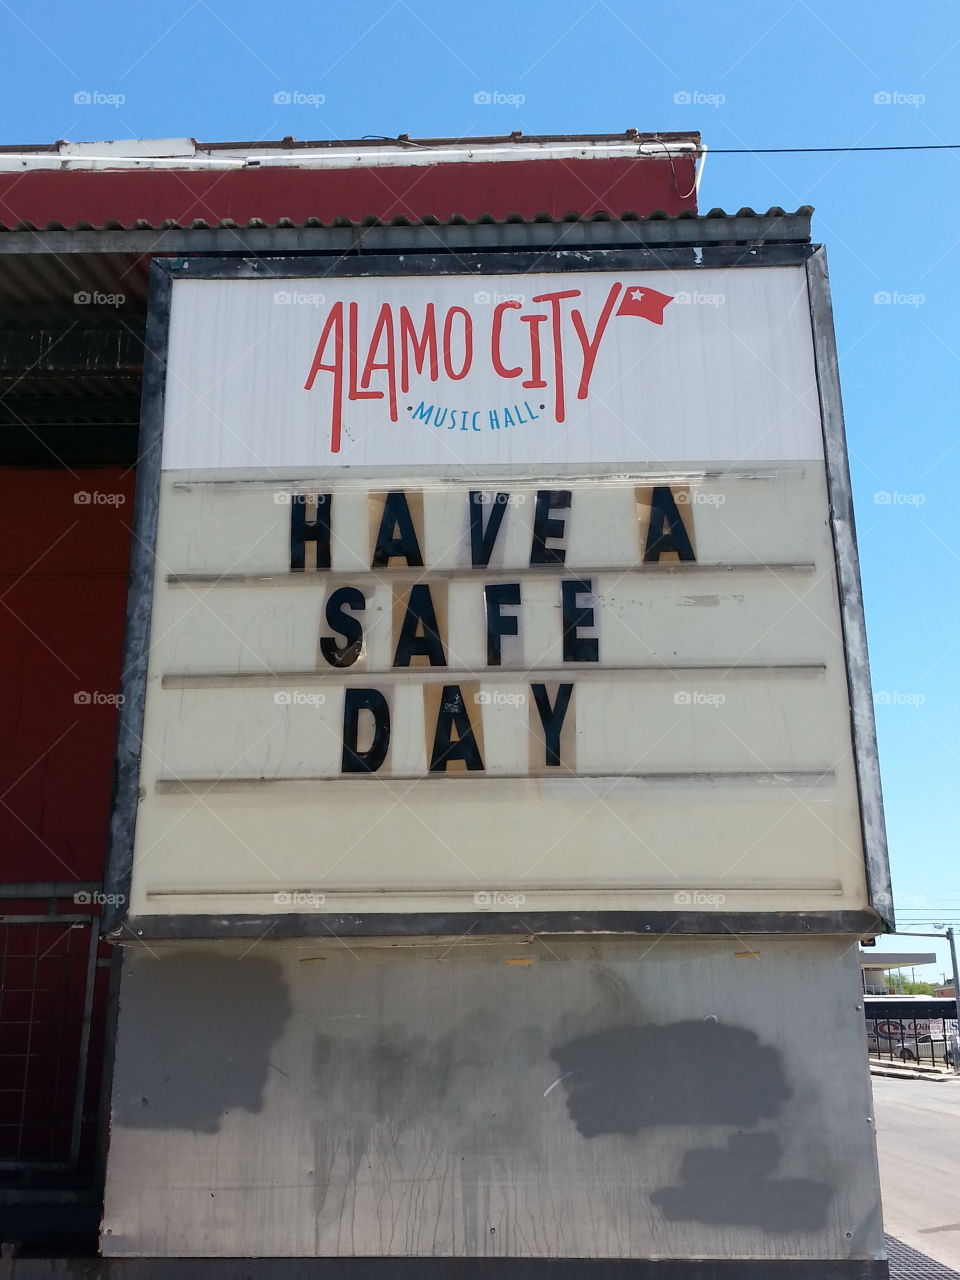 Have a safe day!